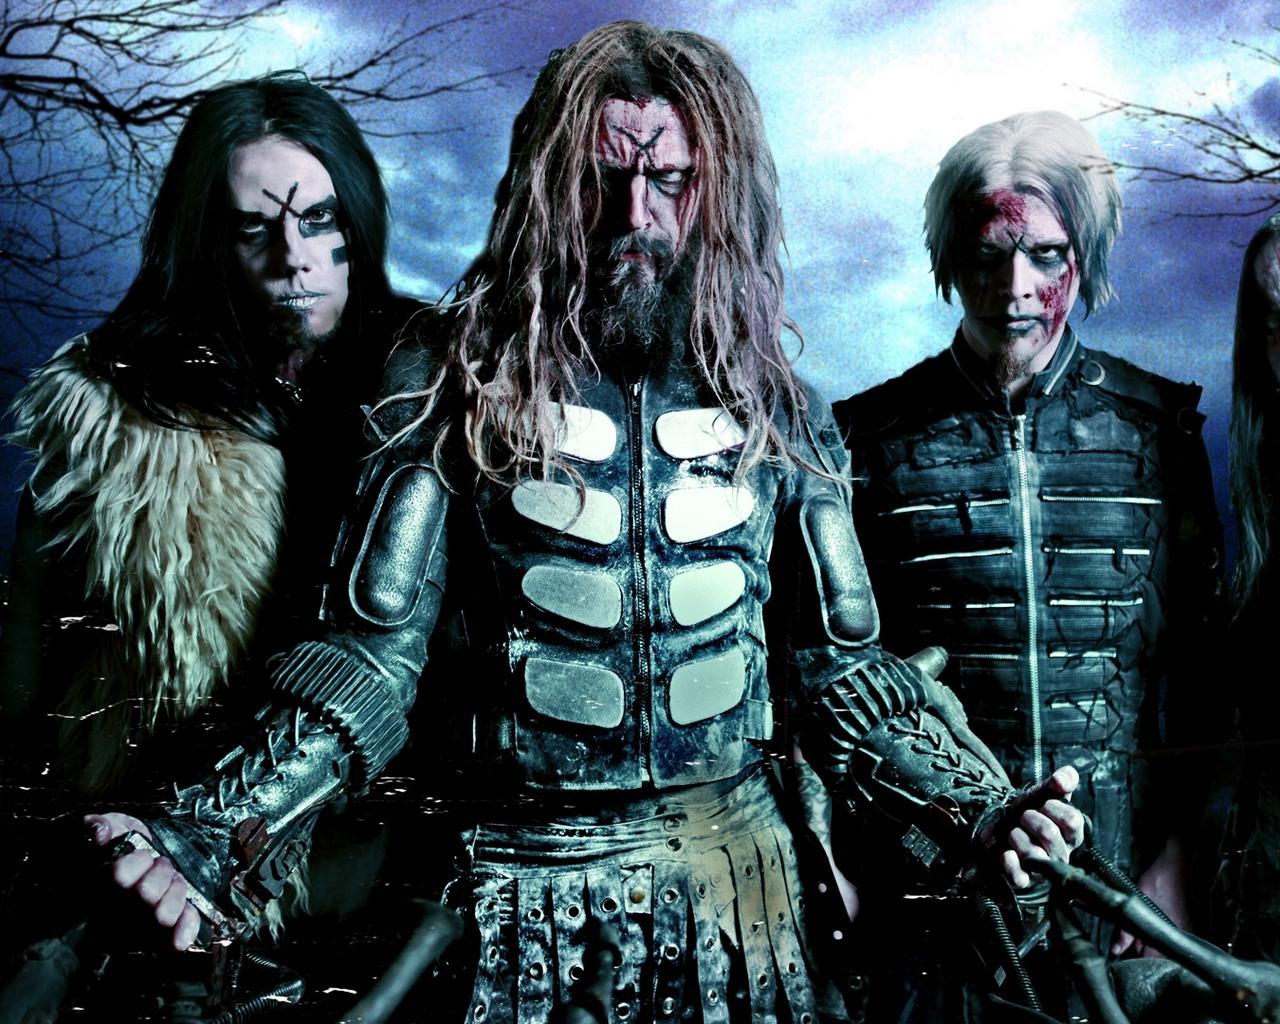 Download wallpaper 1280x1024 rob zombie, image, band